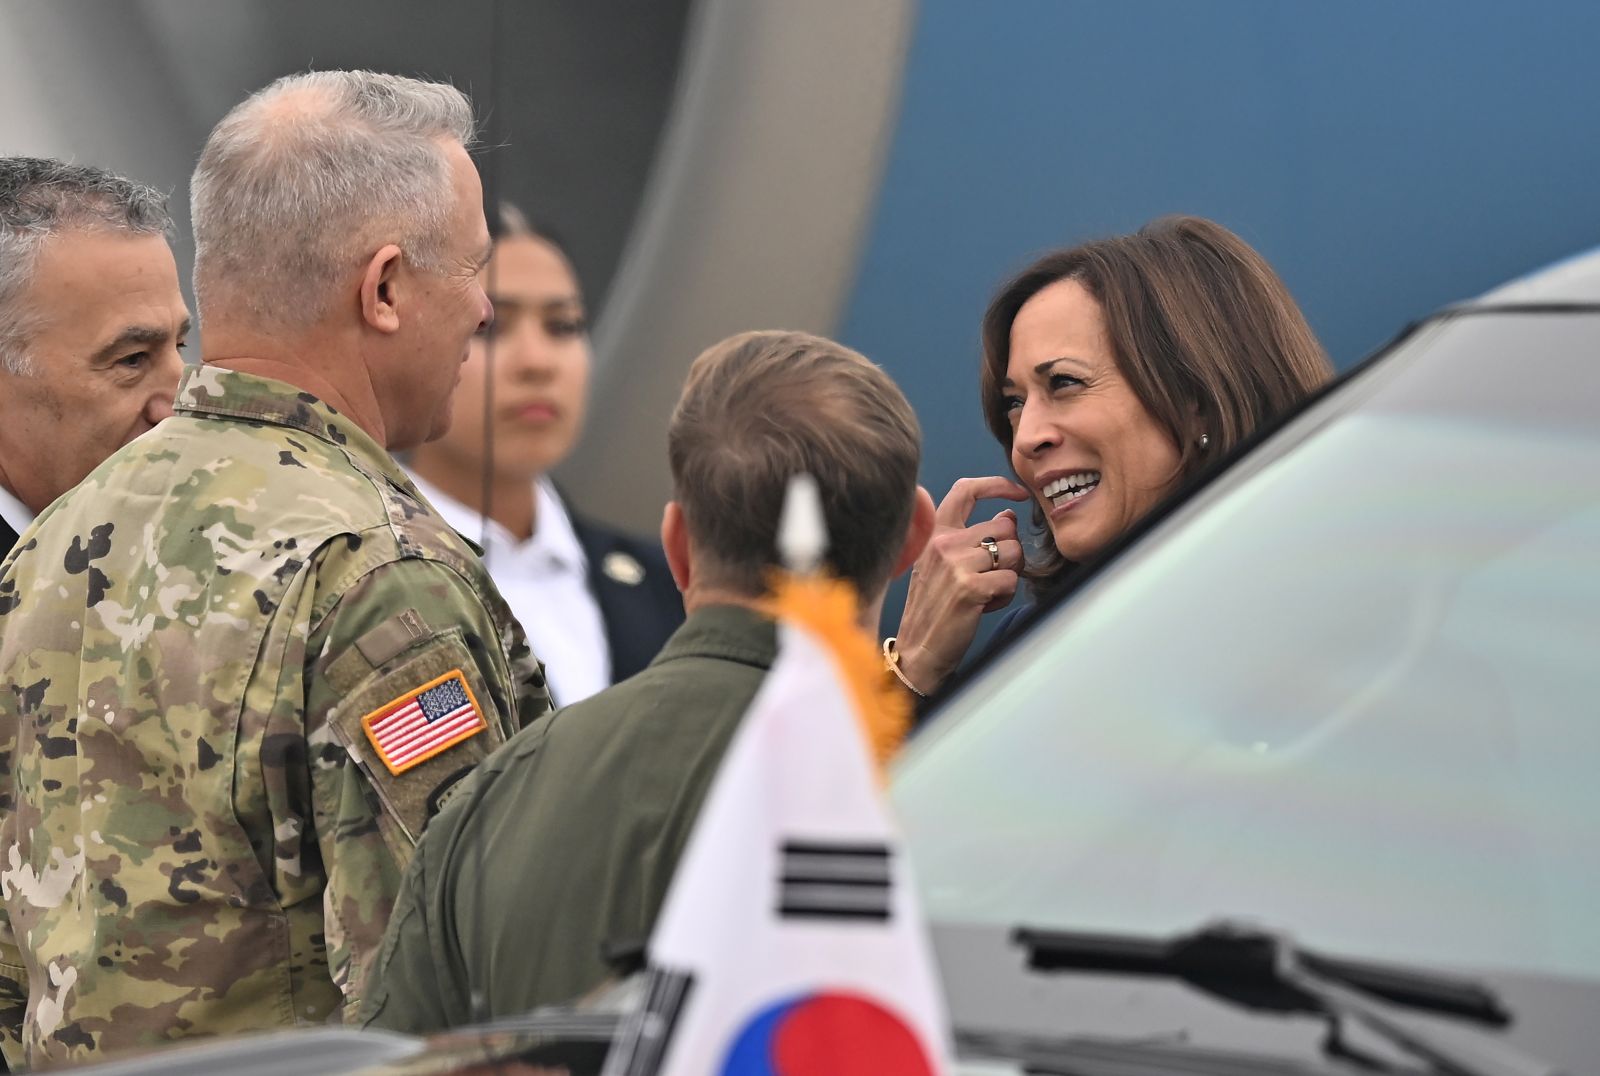 epa10212594 U.S. Vice President Kamala Harris (R) arrives at Osan Air Base in Pyeongtaek, South Korea, 29 September 2022. Harris is in South Korea on an official visit after attending former Japanese Prime Minister Shinzo Abe's state funeral in Japan.  EPA/JUNG YEON-JE / POOL